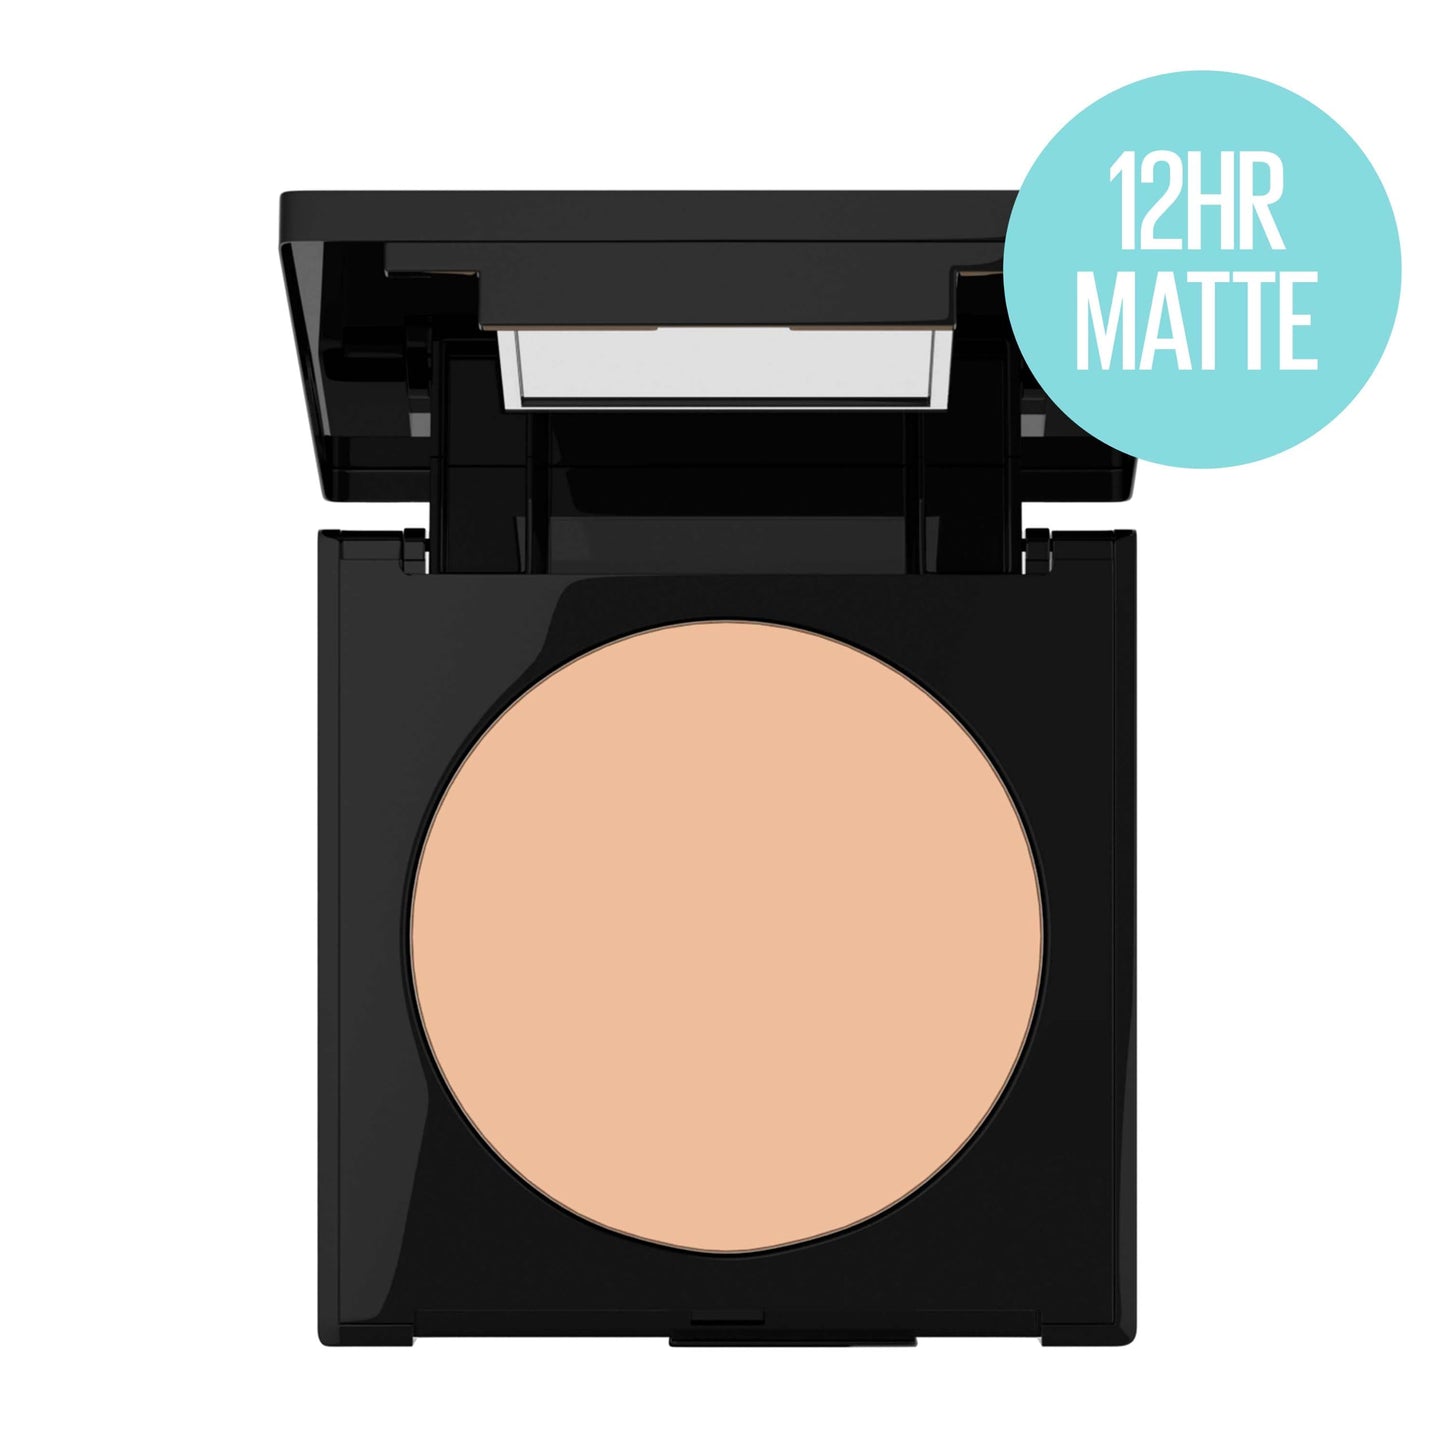 Maybelline New York Fit Me Matte + Poreless Pressed Face Powder Makeup, Warm Nude, 0.28 Ounce